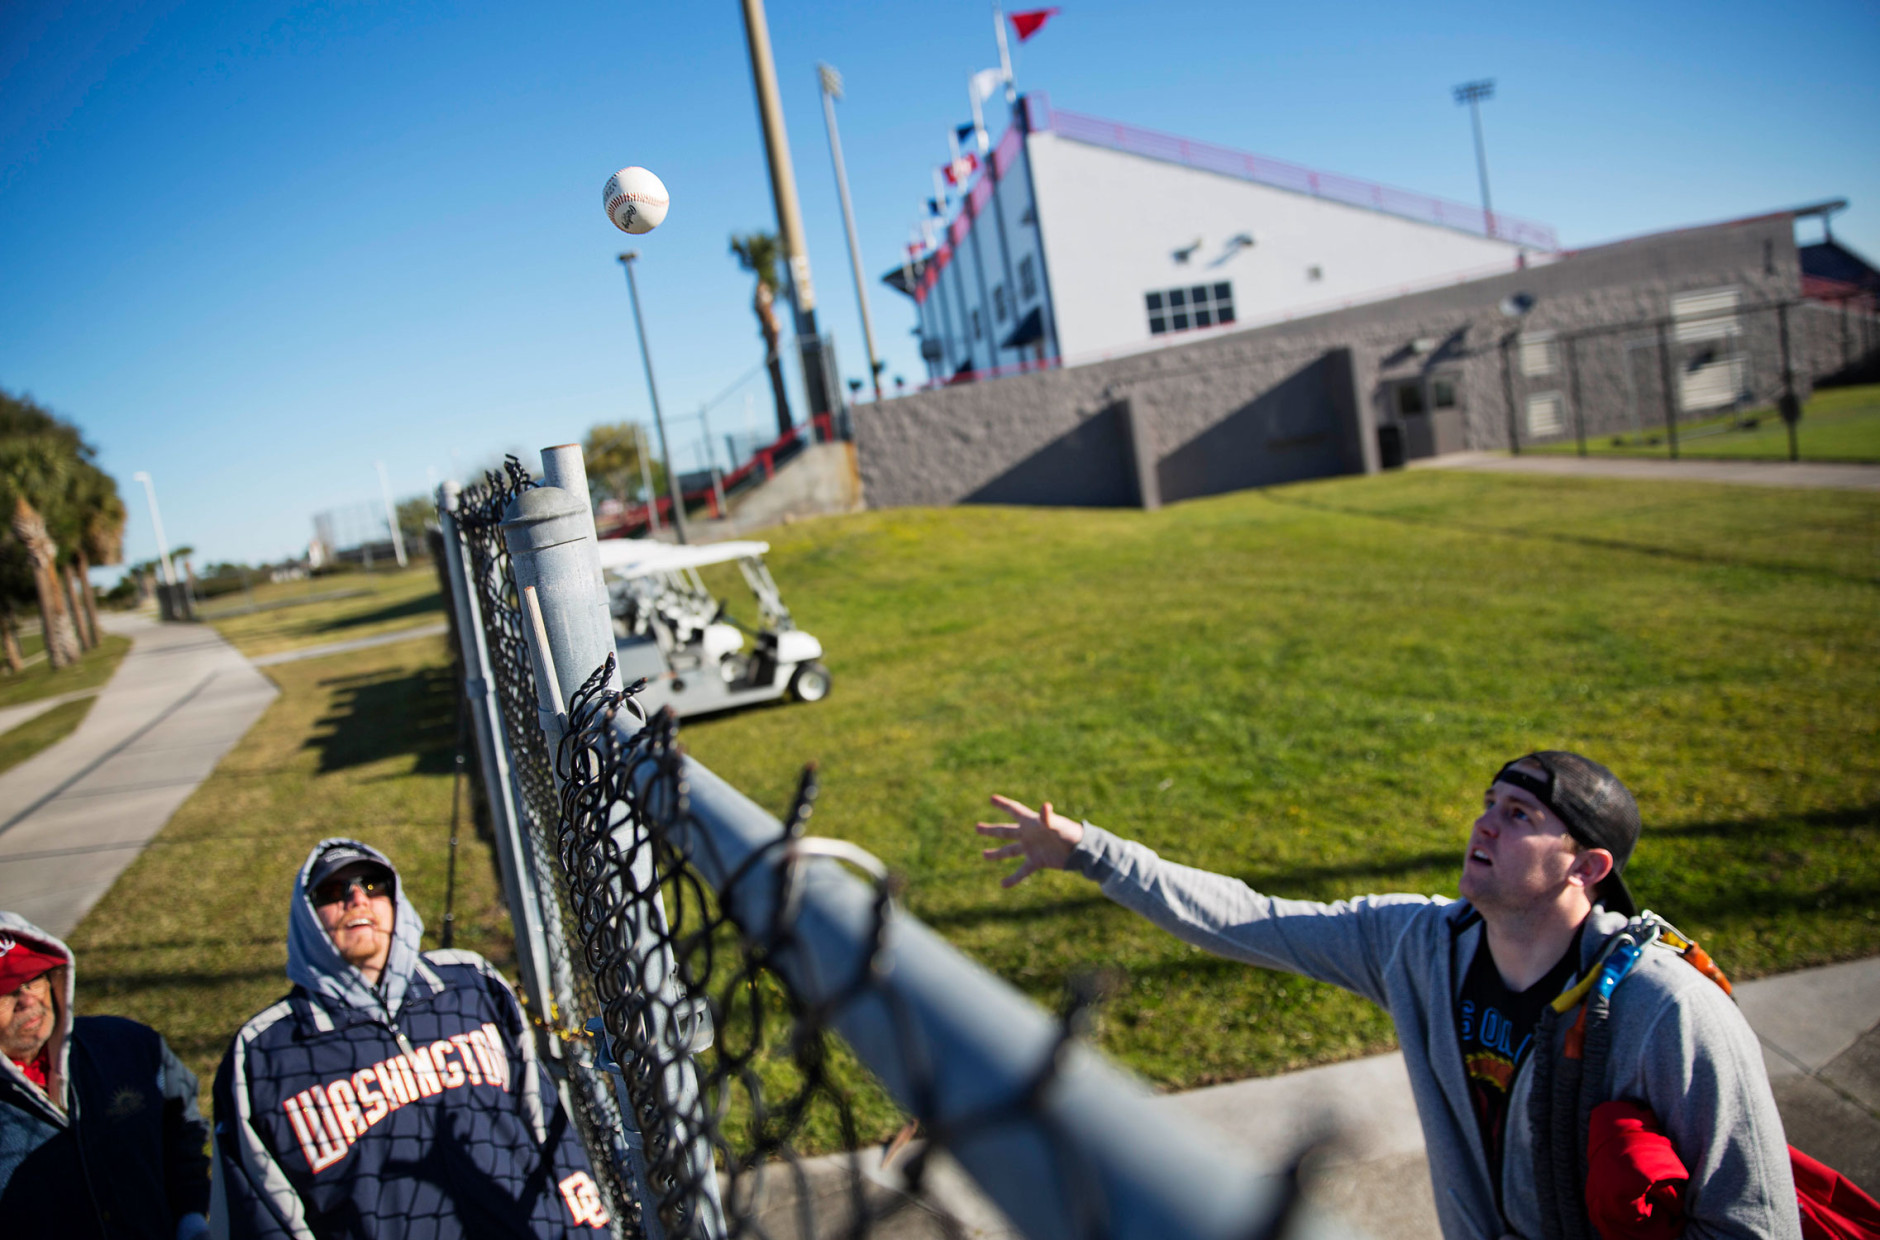 Washington Nationals pitcher Drew Storen, right, tosses a ball over the fence after autographing it for fans as pitchers and catchers officially report to the team's spring training baseball facility, Thursday, Feb. 19, 2015, in Viera, Fla. (AP Photo/David Goldman)